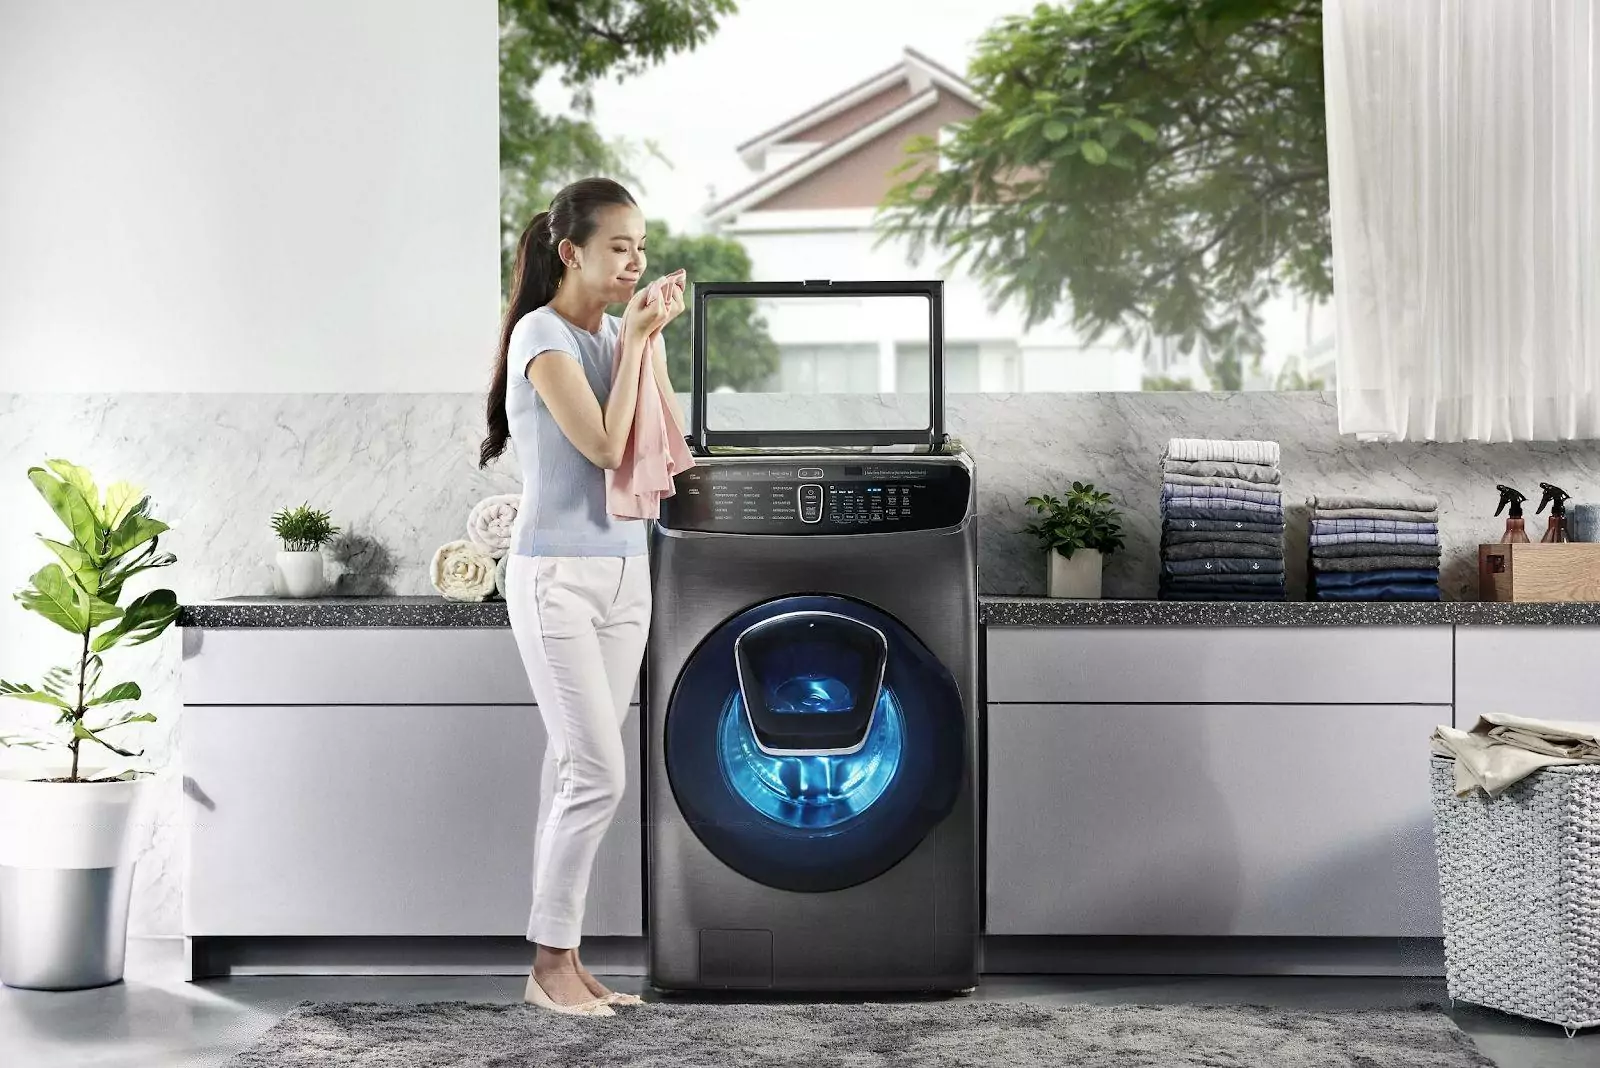 Choose a washing machine with many features